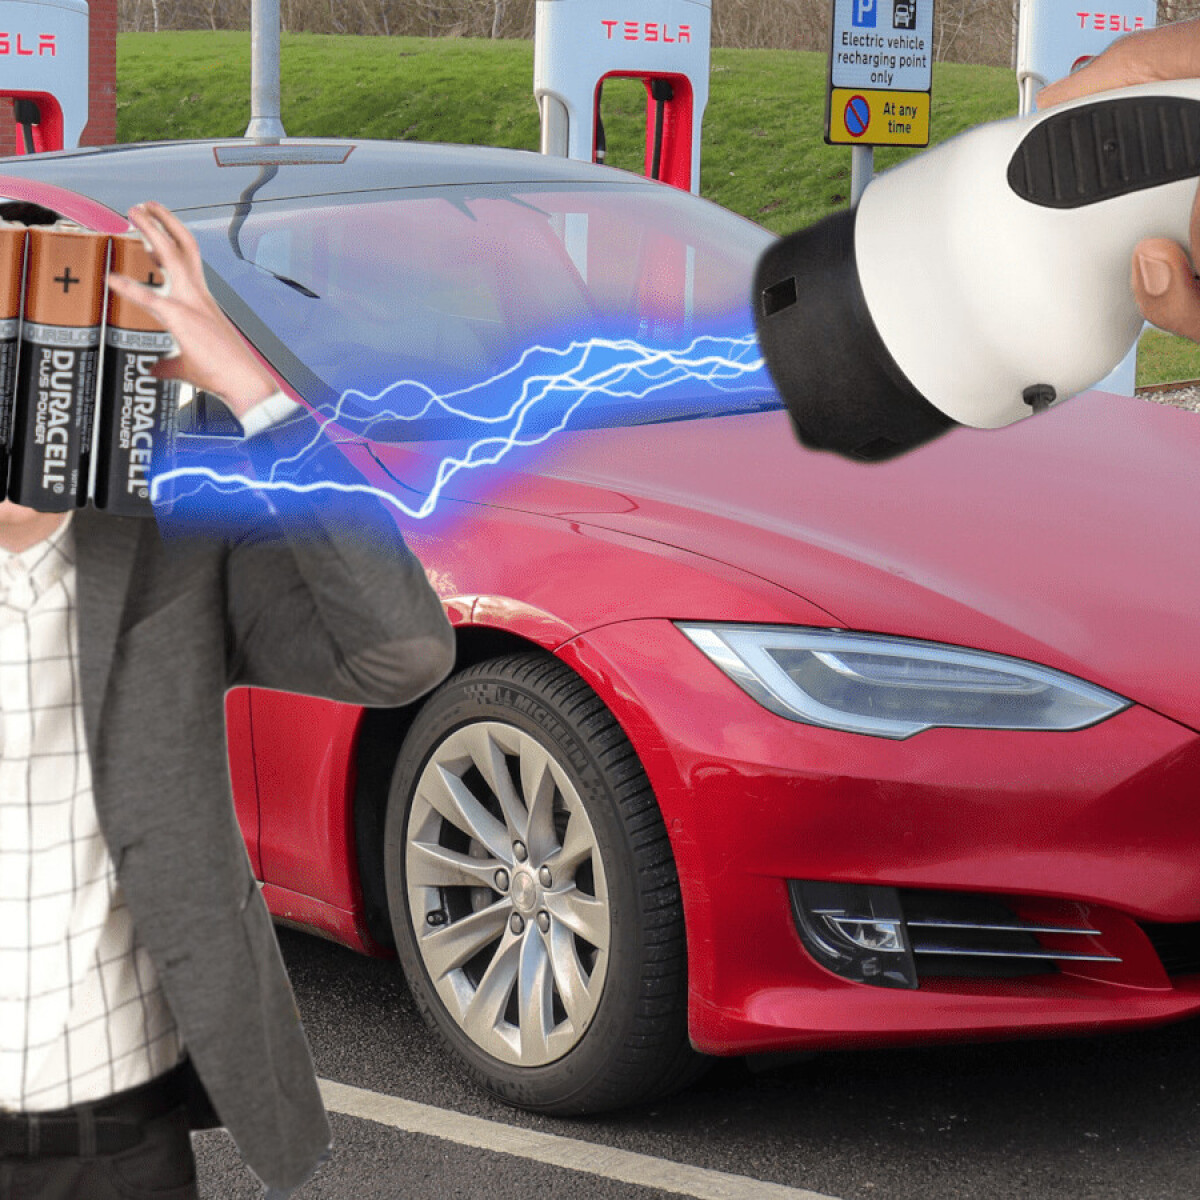 Tvunget benzin Governable Engineers find Tesla's Model 3 is secretly equipped to power homes